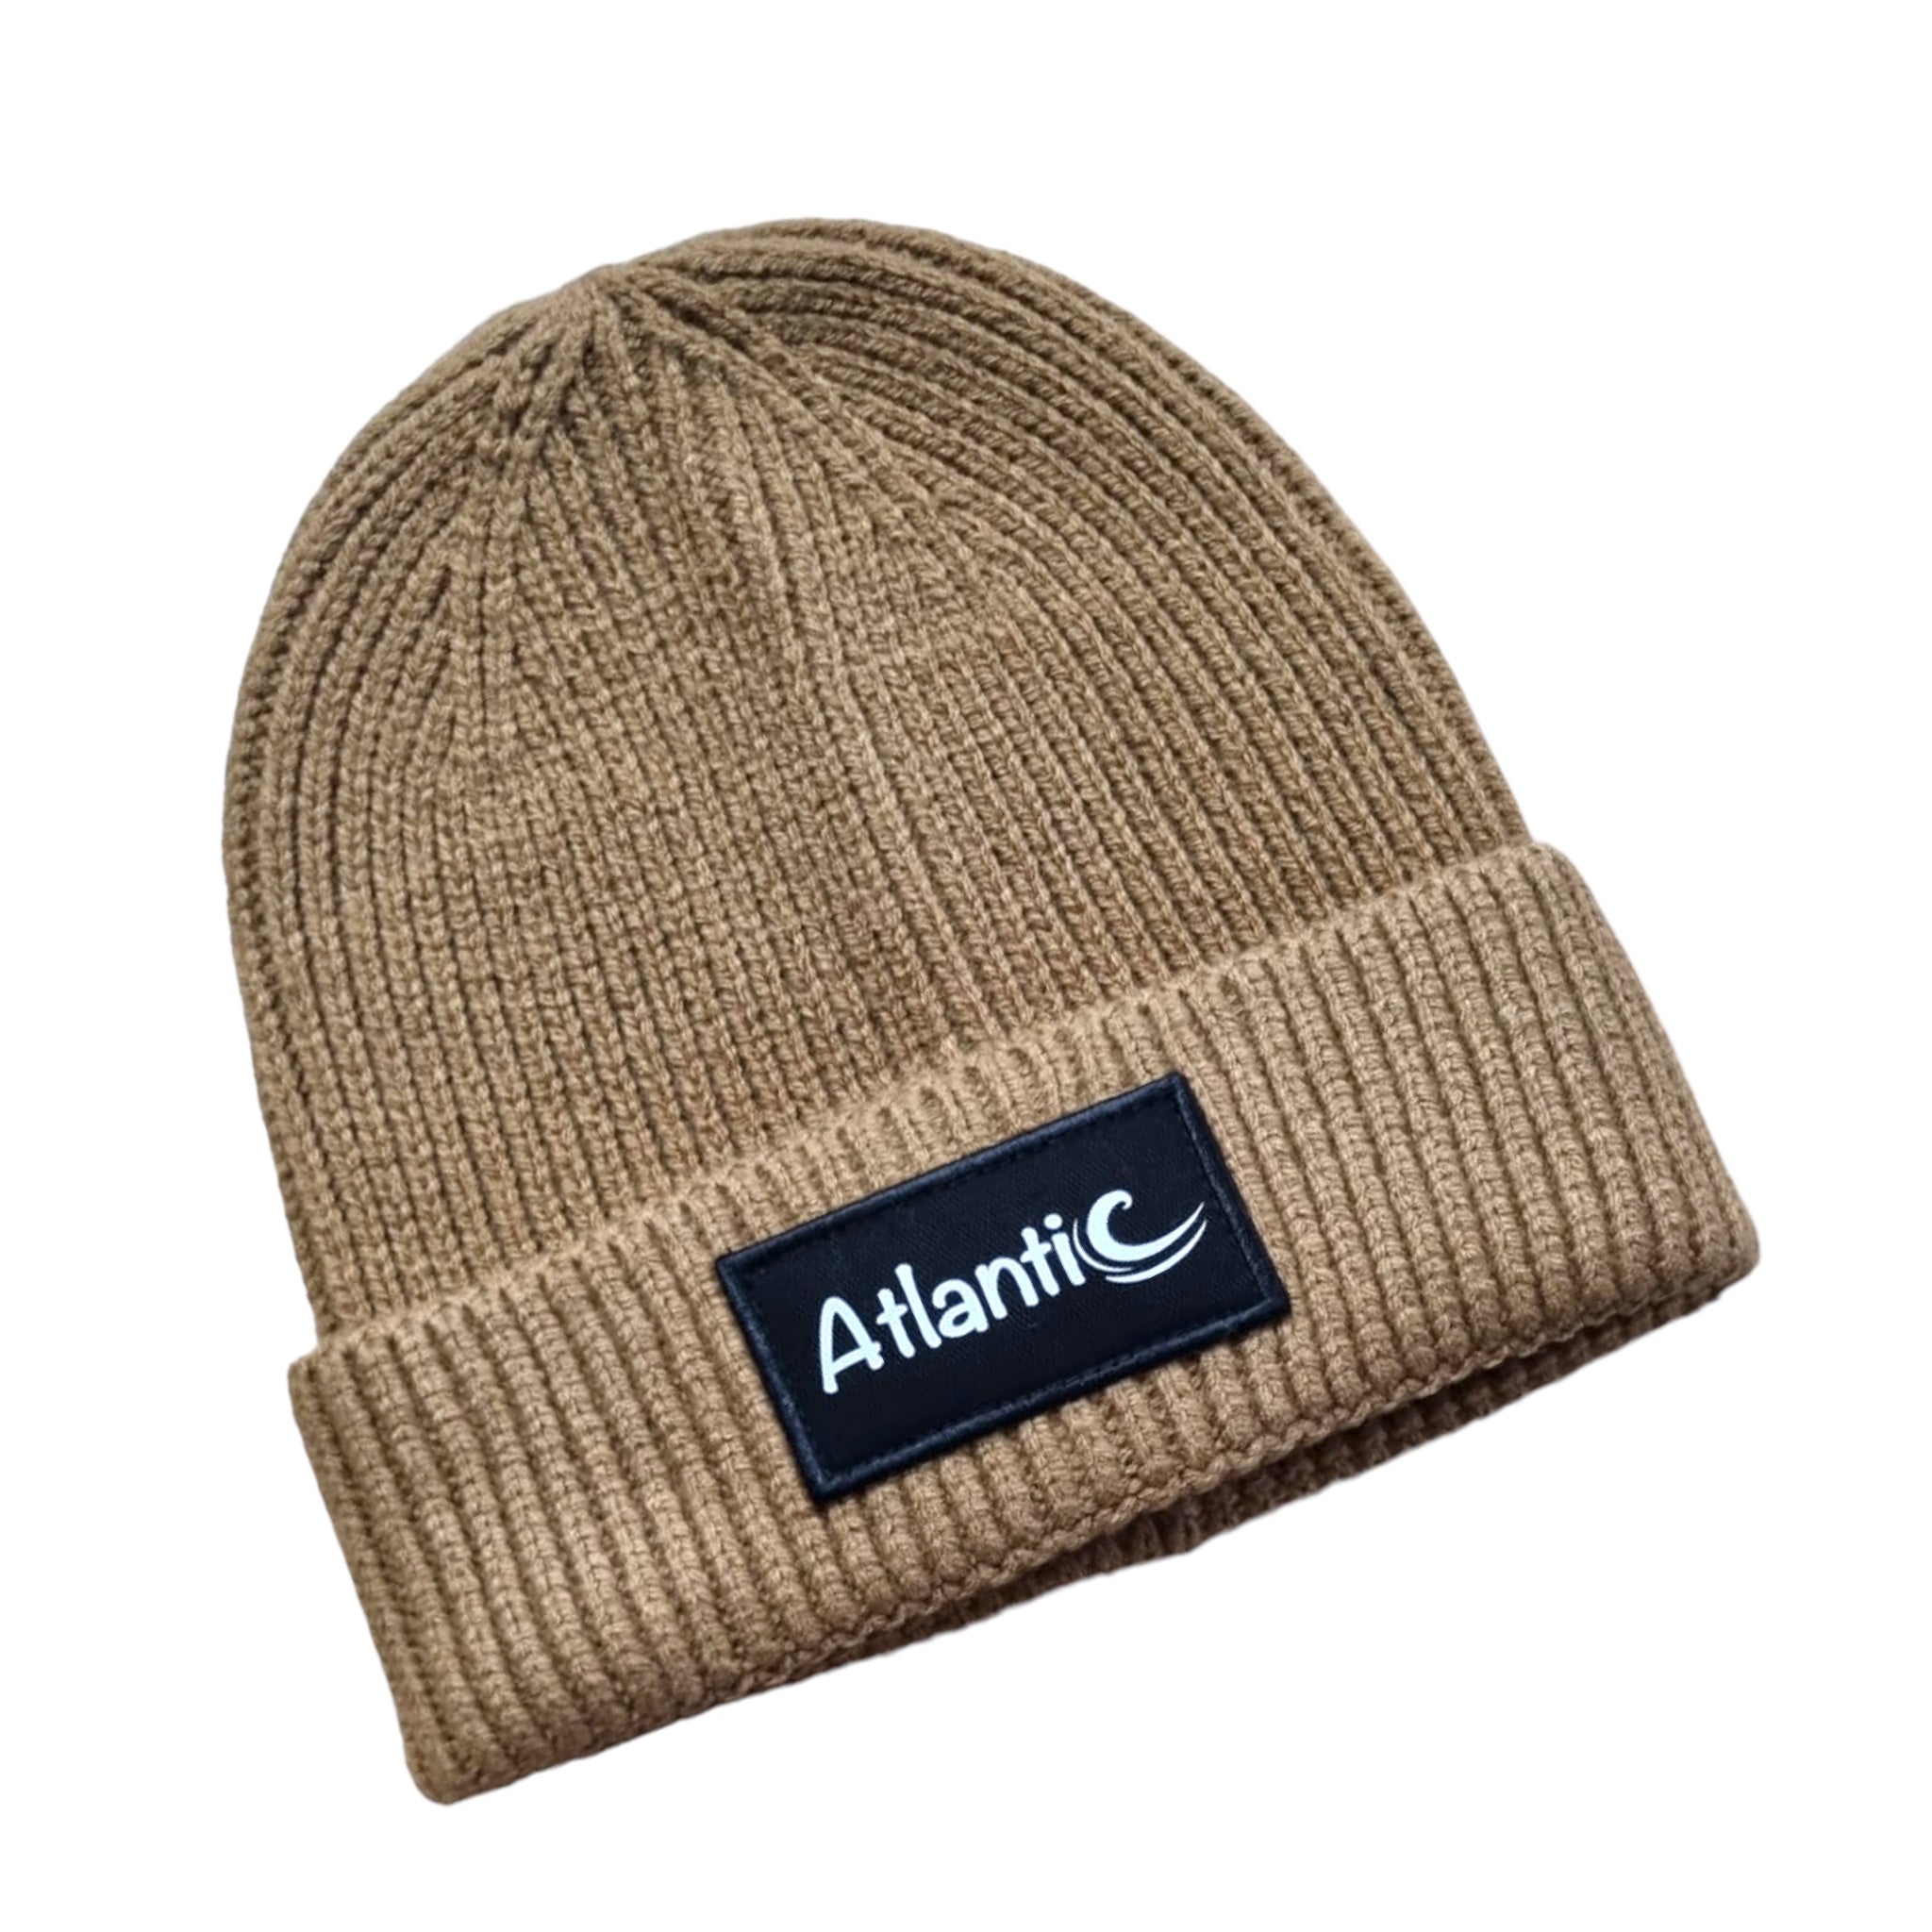 ATLANTIC APPAREL FASHION PATCH BEANIE - BISCUIT